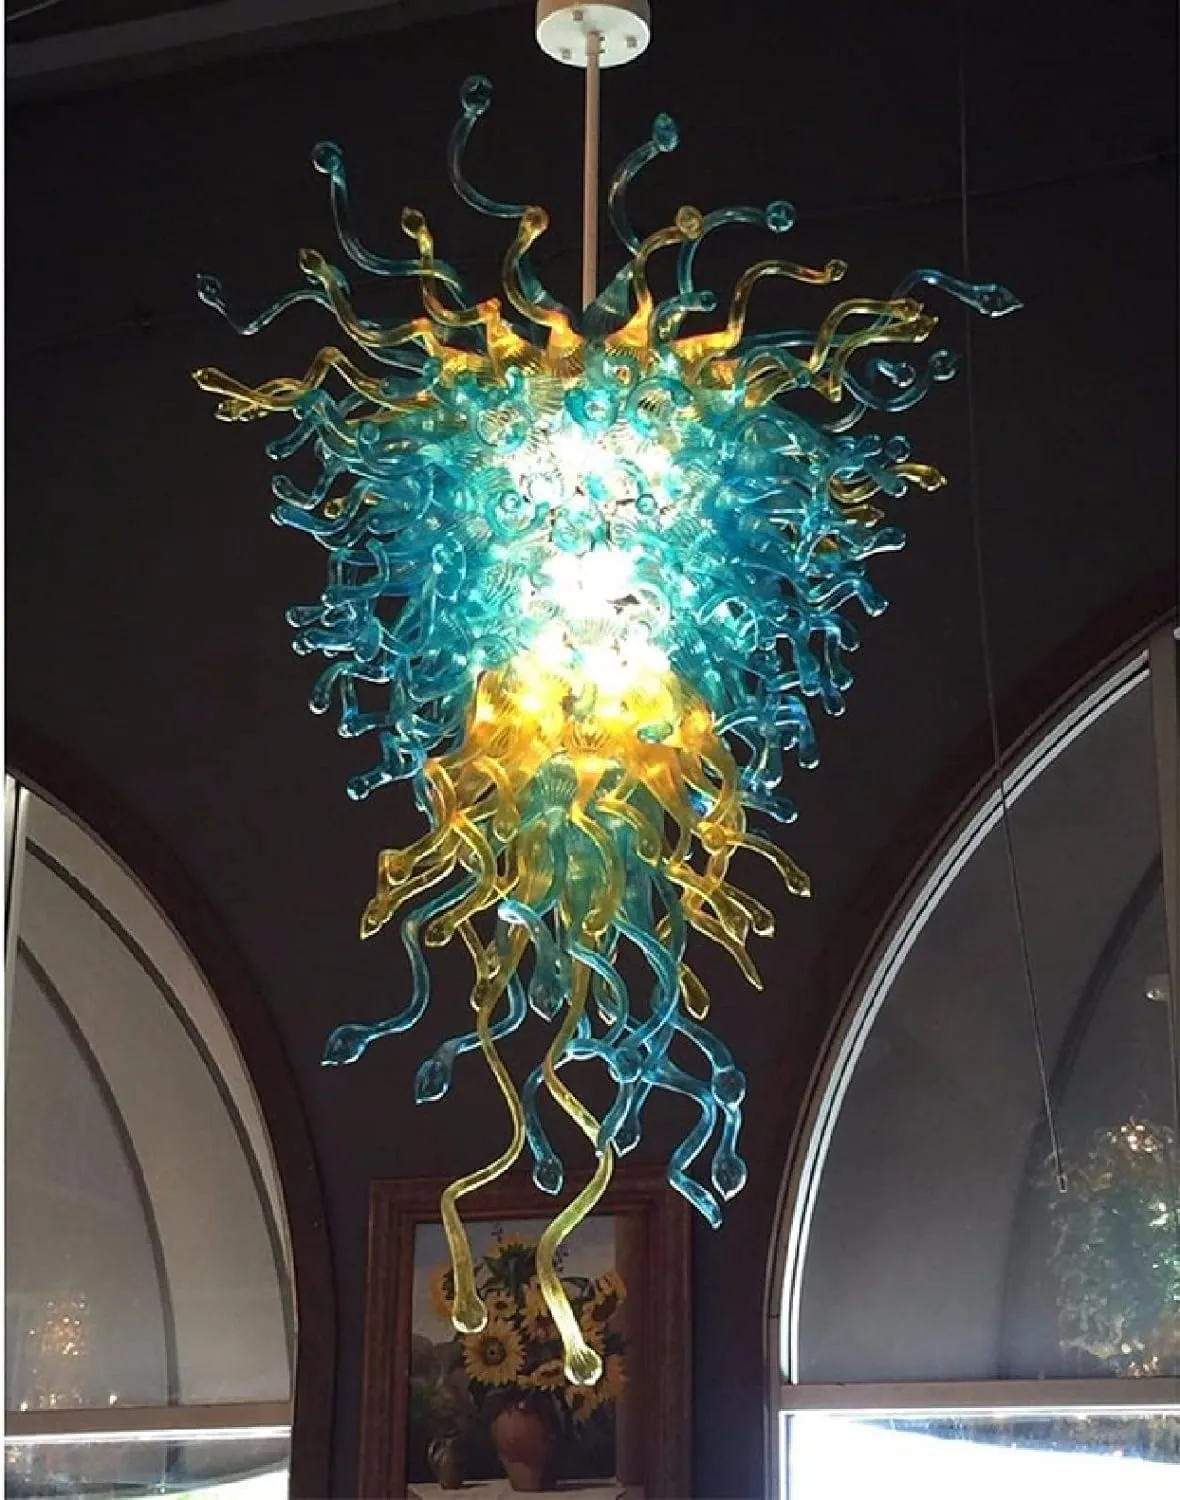 Hand blown glass chandelier Luxury Lagre size pendant island light fixture Suitable for stairs lobby hotel living room (customizable size and color available)